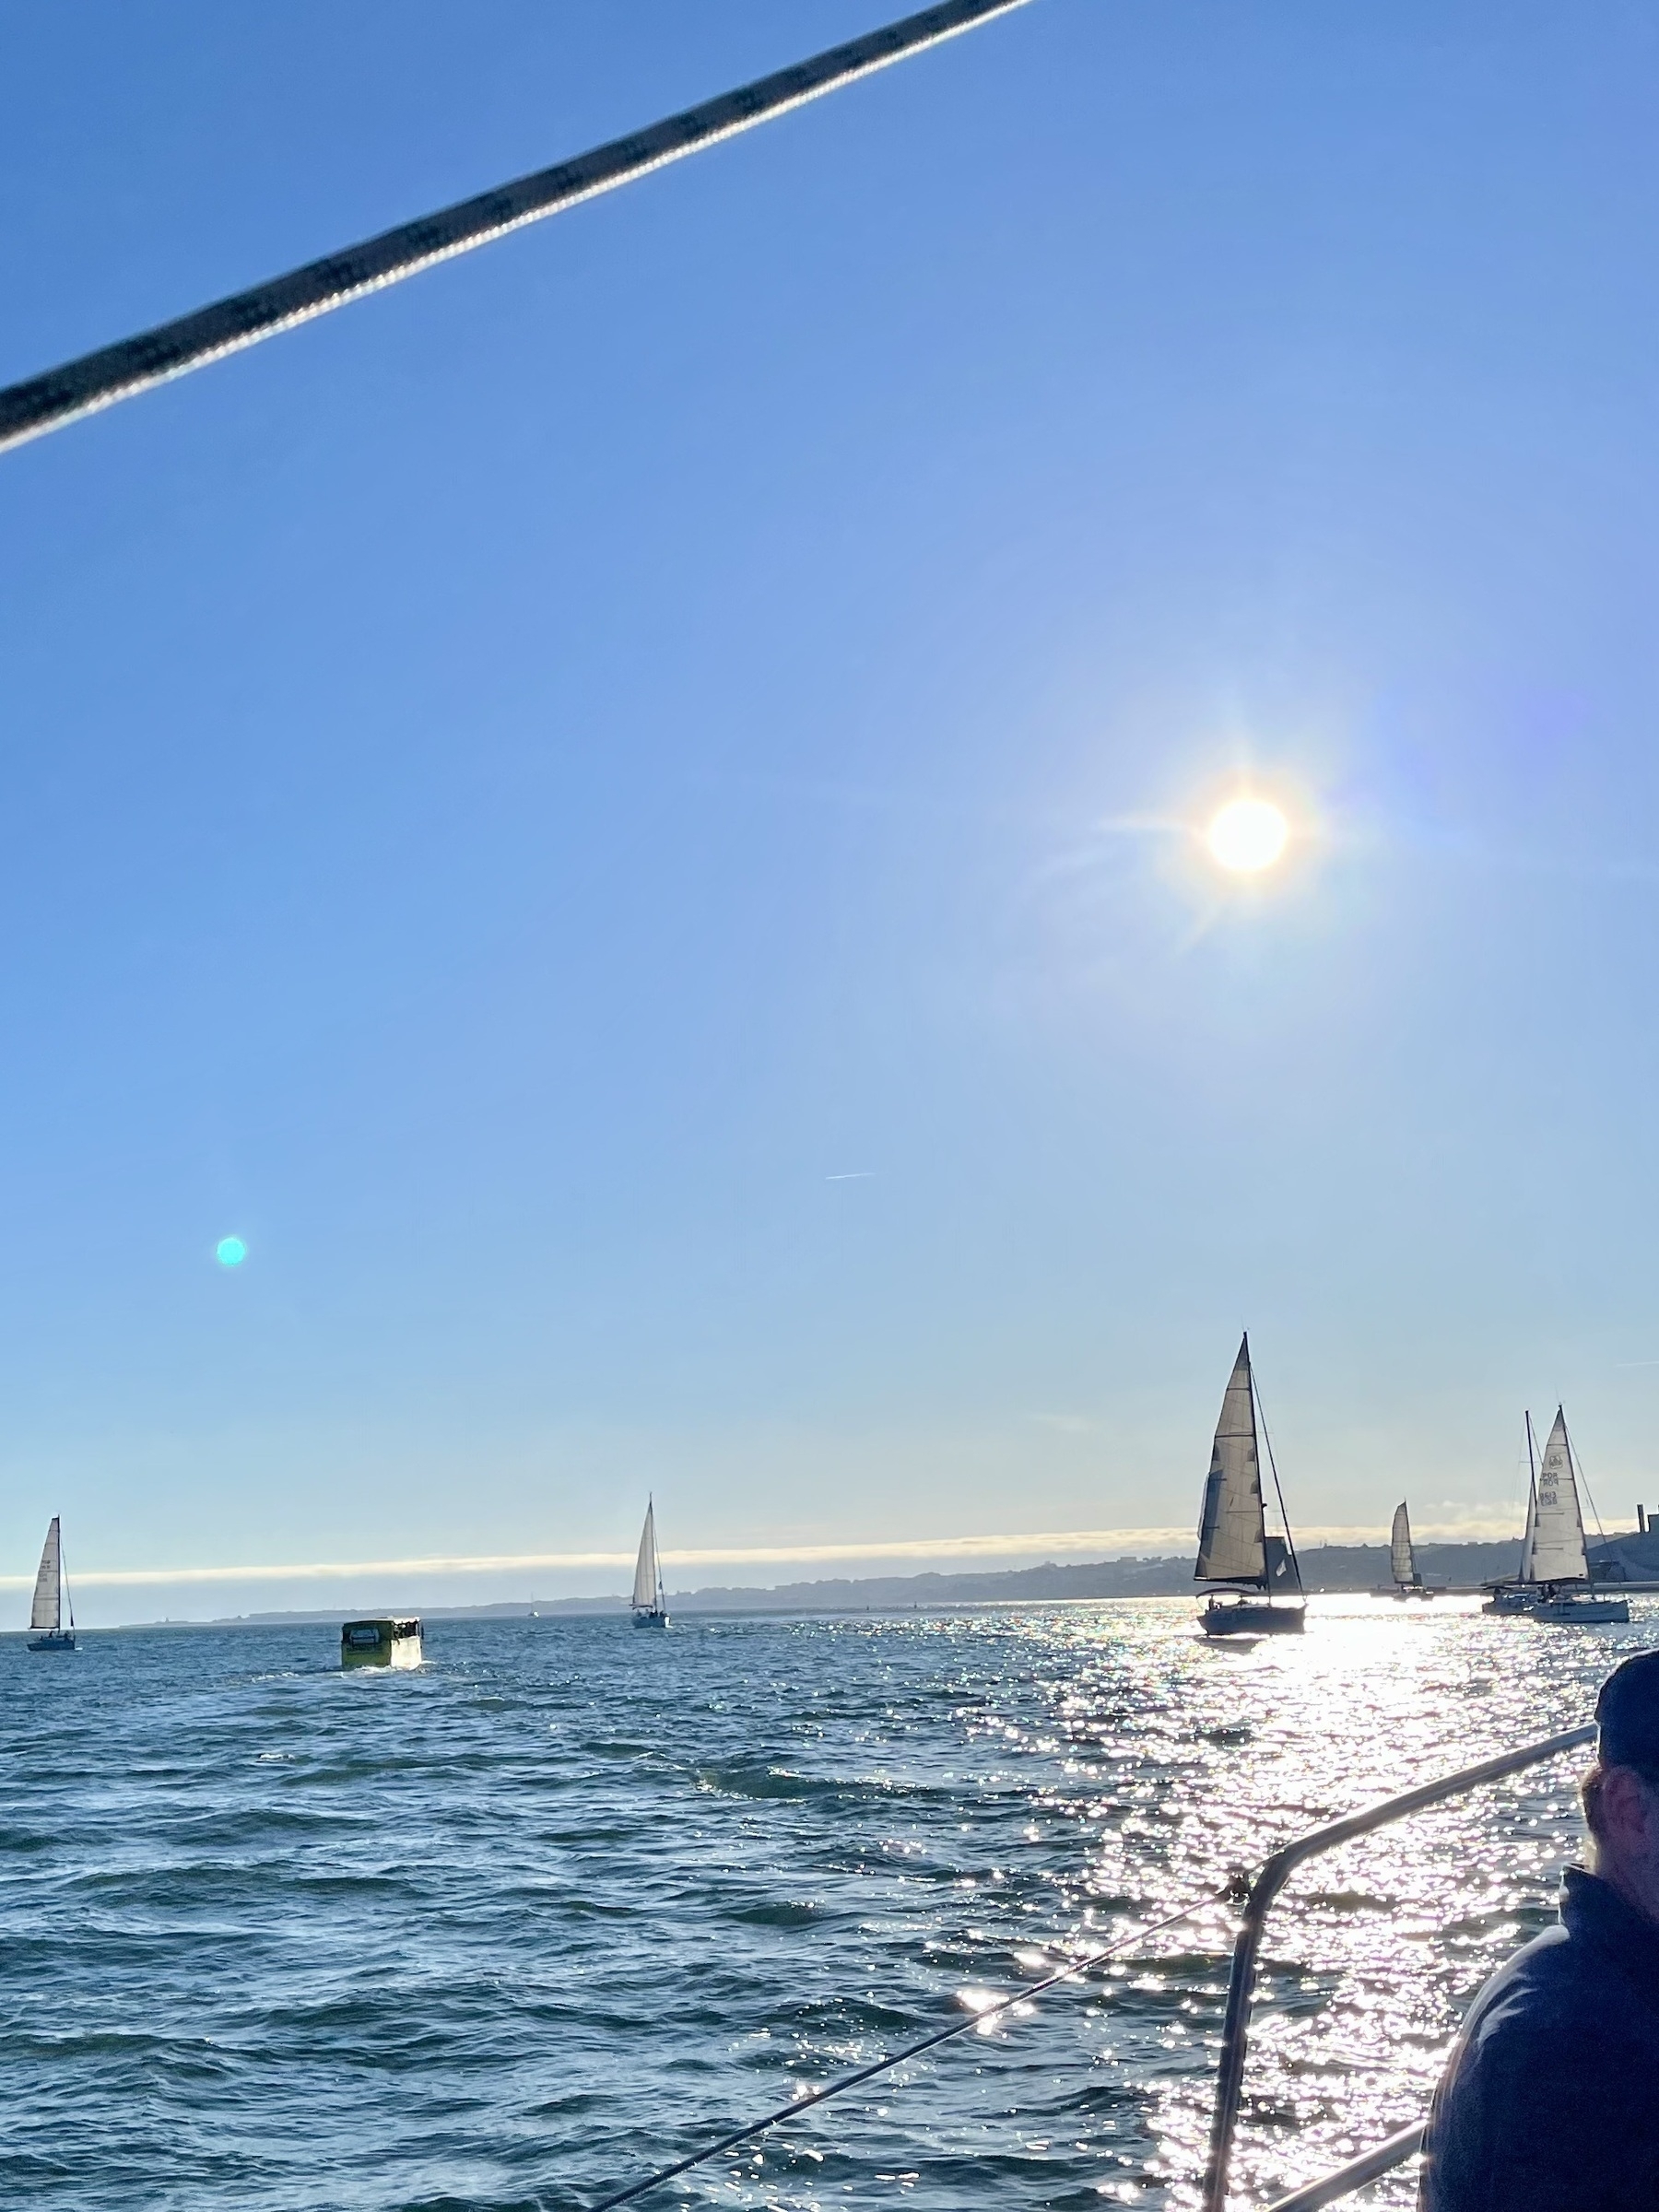 Sailboats glide across glittering water with a sun low in the blue sky, viewed from a boat with a visible cable and part of a person's head.